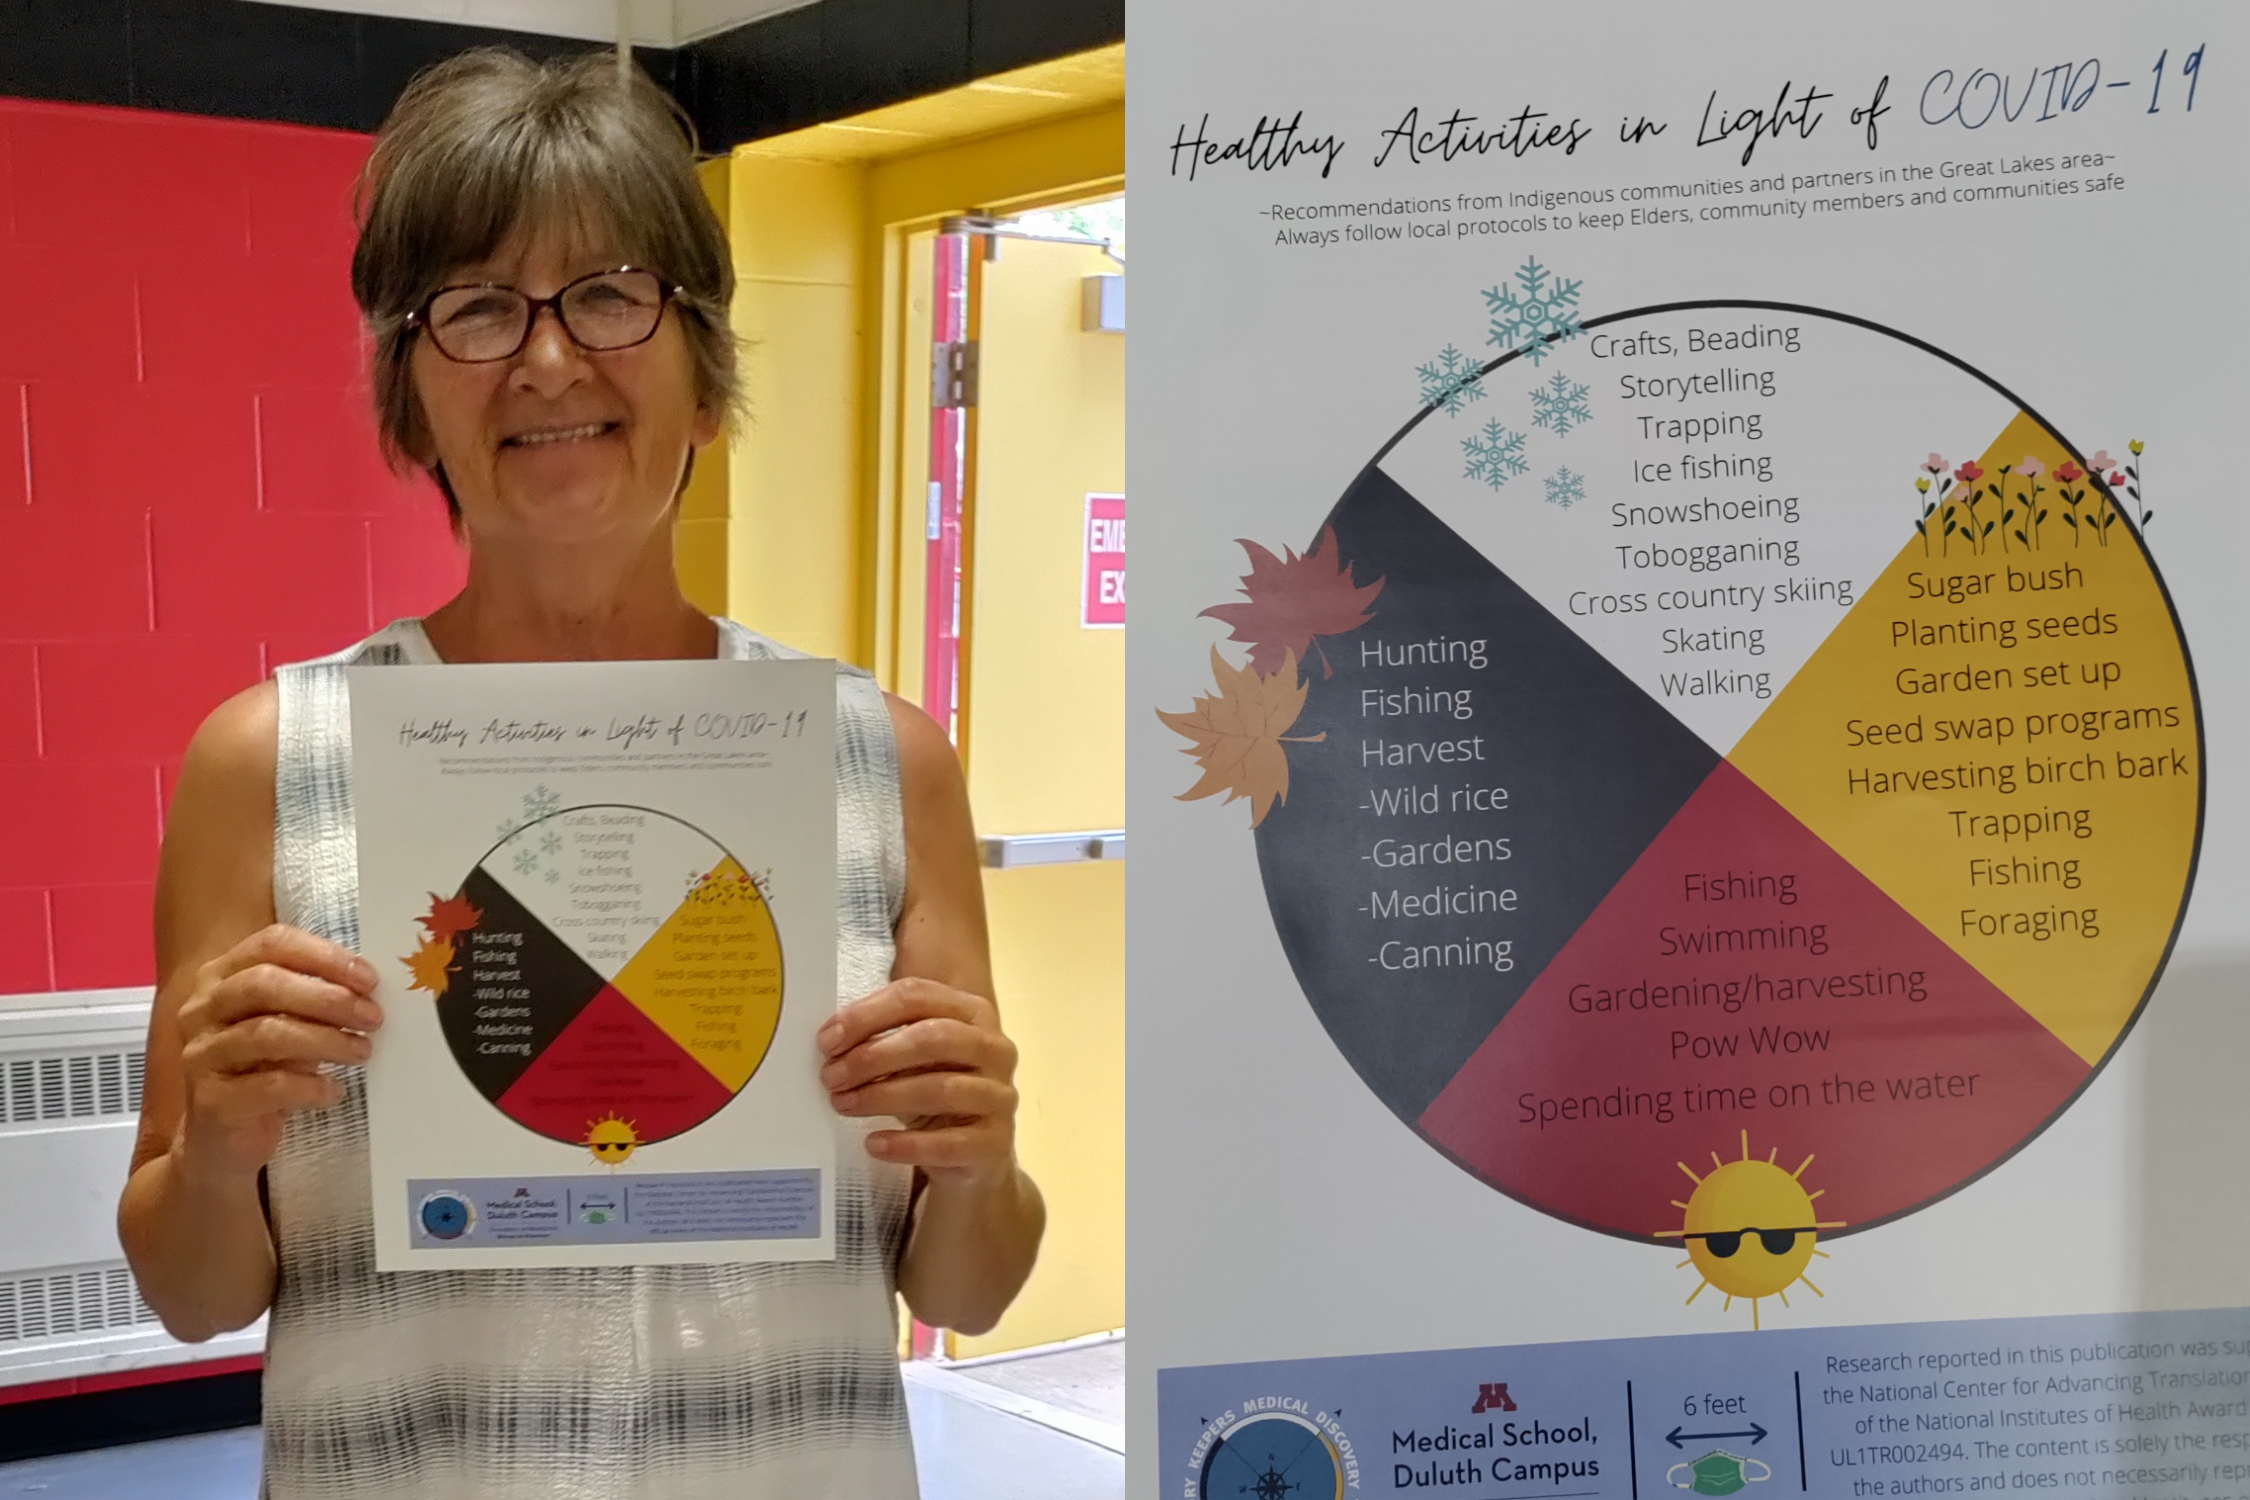 Collette Pederson shows off the “Healthy Activities in Light of Covid-19” wheel chart at the Grand Portage Health Fair. Wheel chart details: https://memorykeepersmdt.com/health-activities-in-light-of-covid-19/